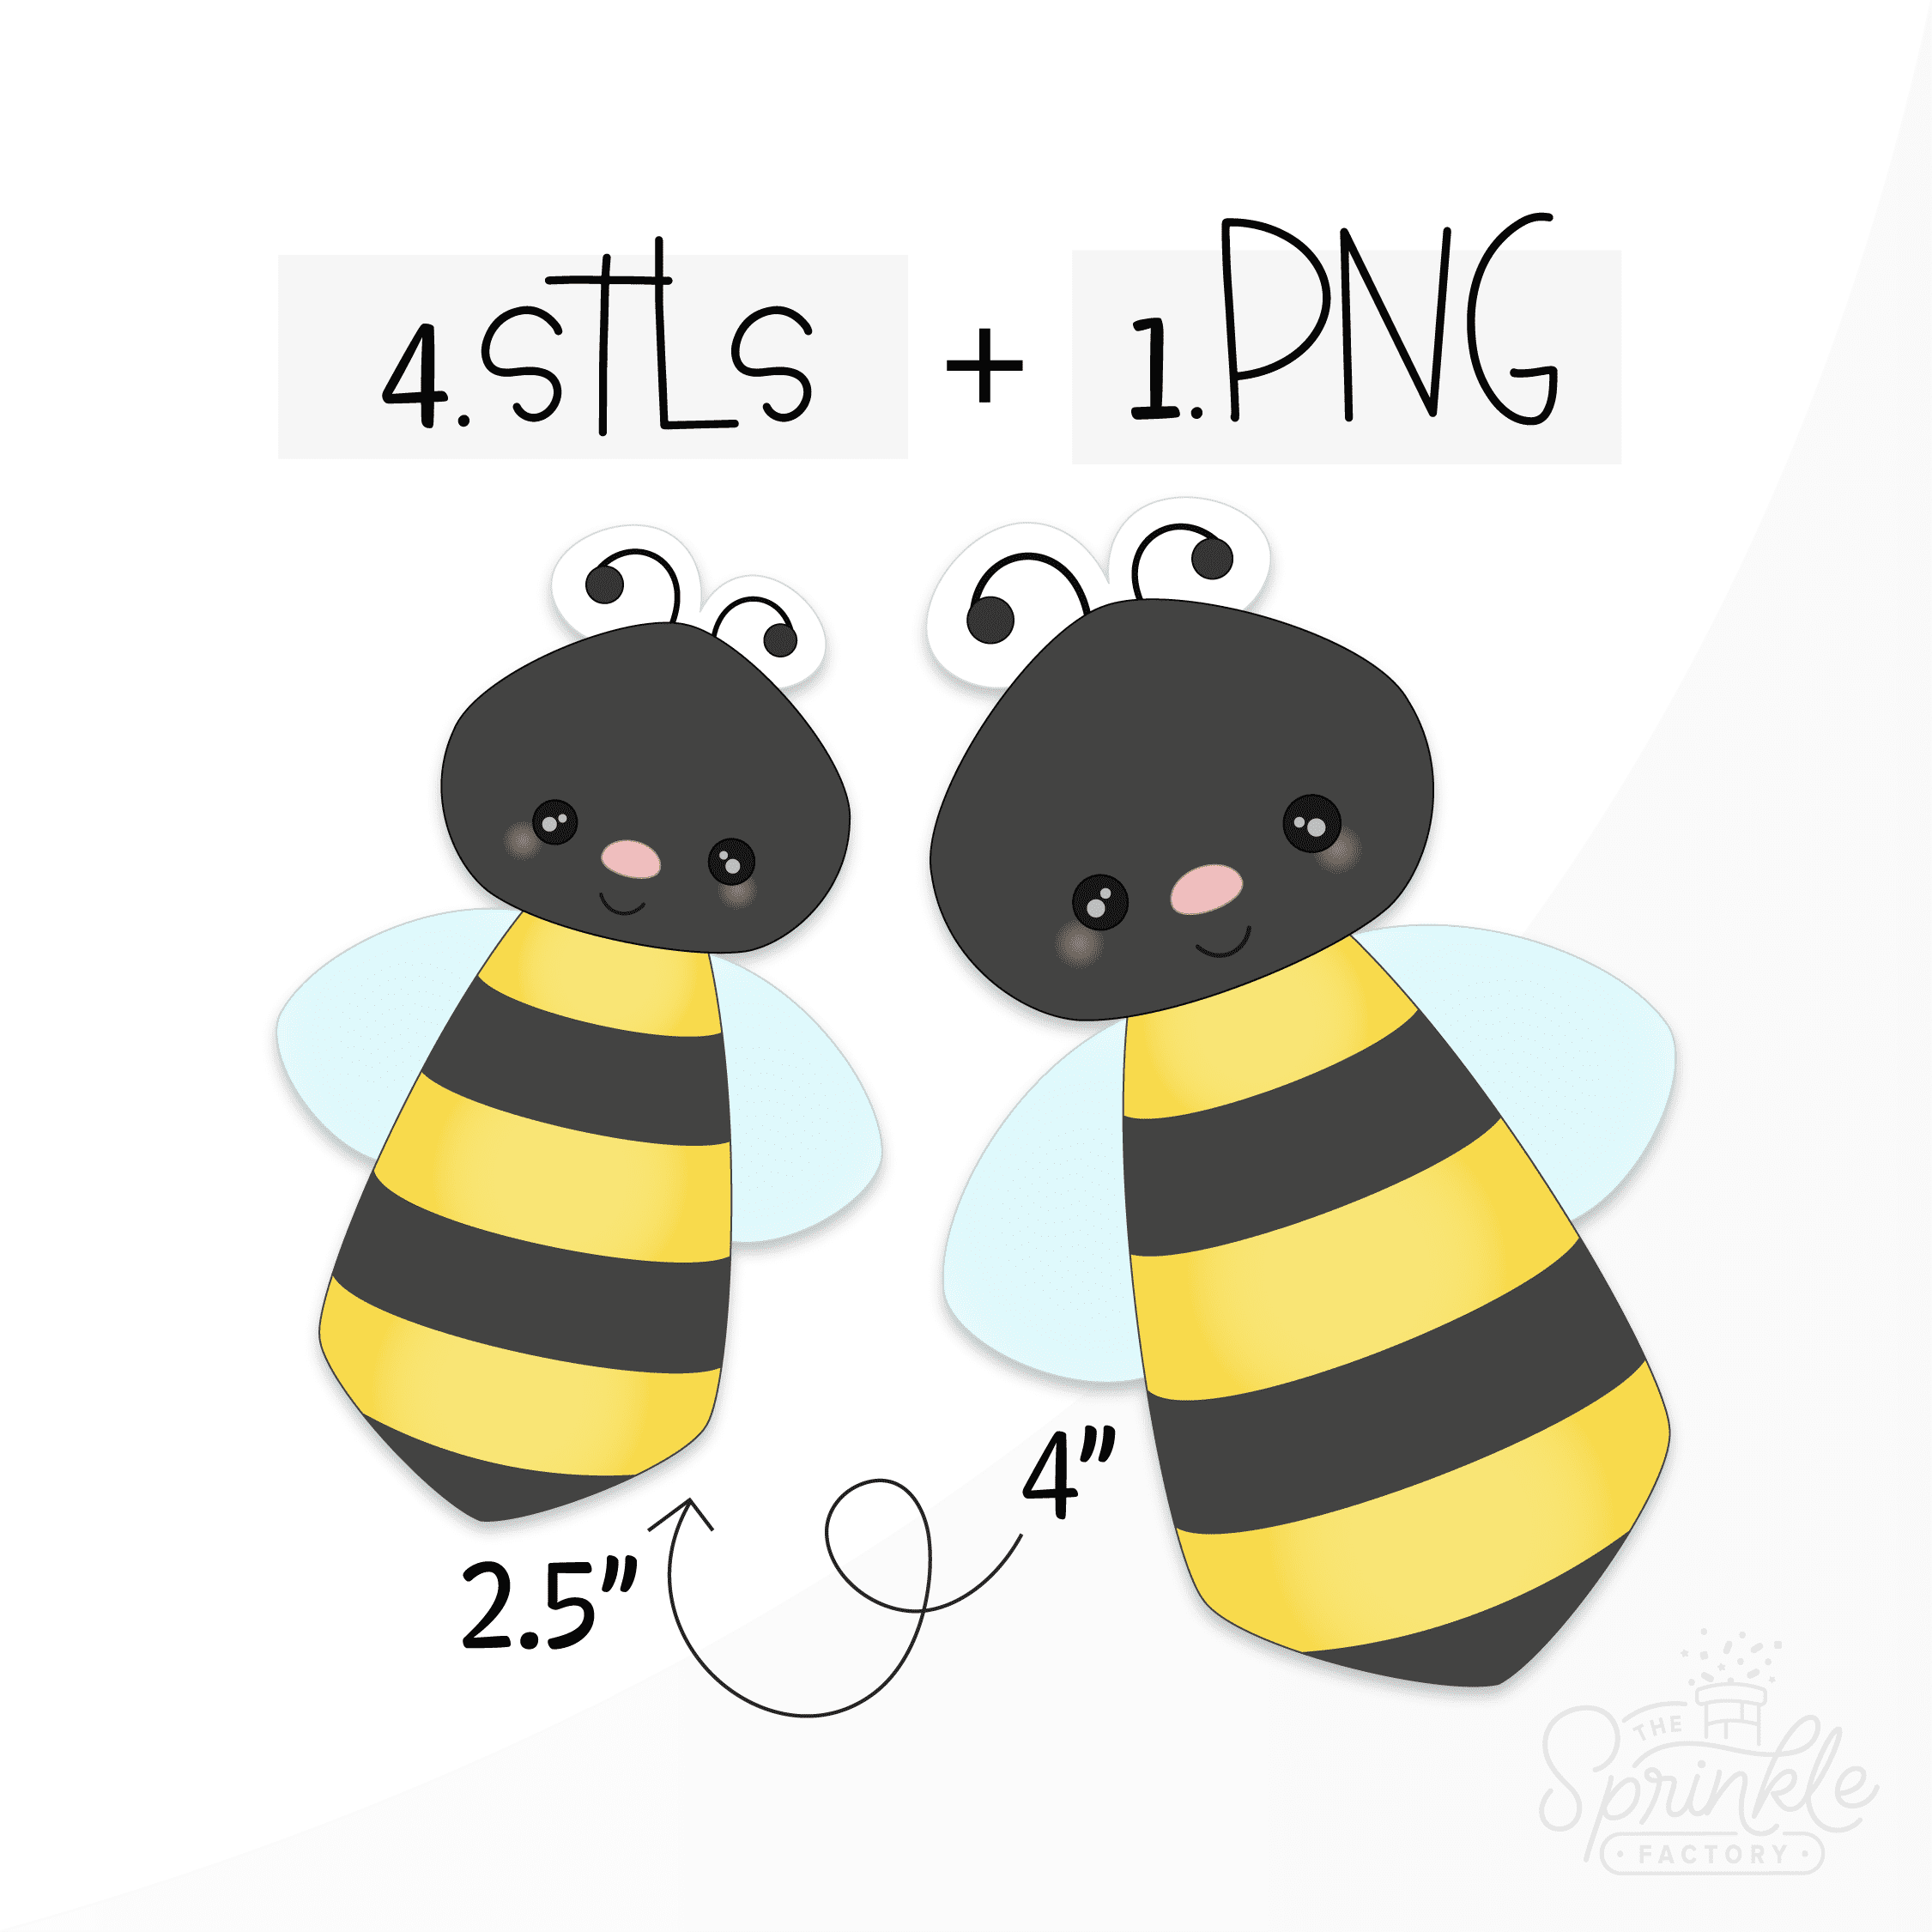 Clipart of a tall skinny vertical bee with a black head and black and yellow body with light blue wings with STL and PNG details and a second smaller bee showing size.